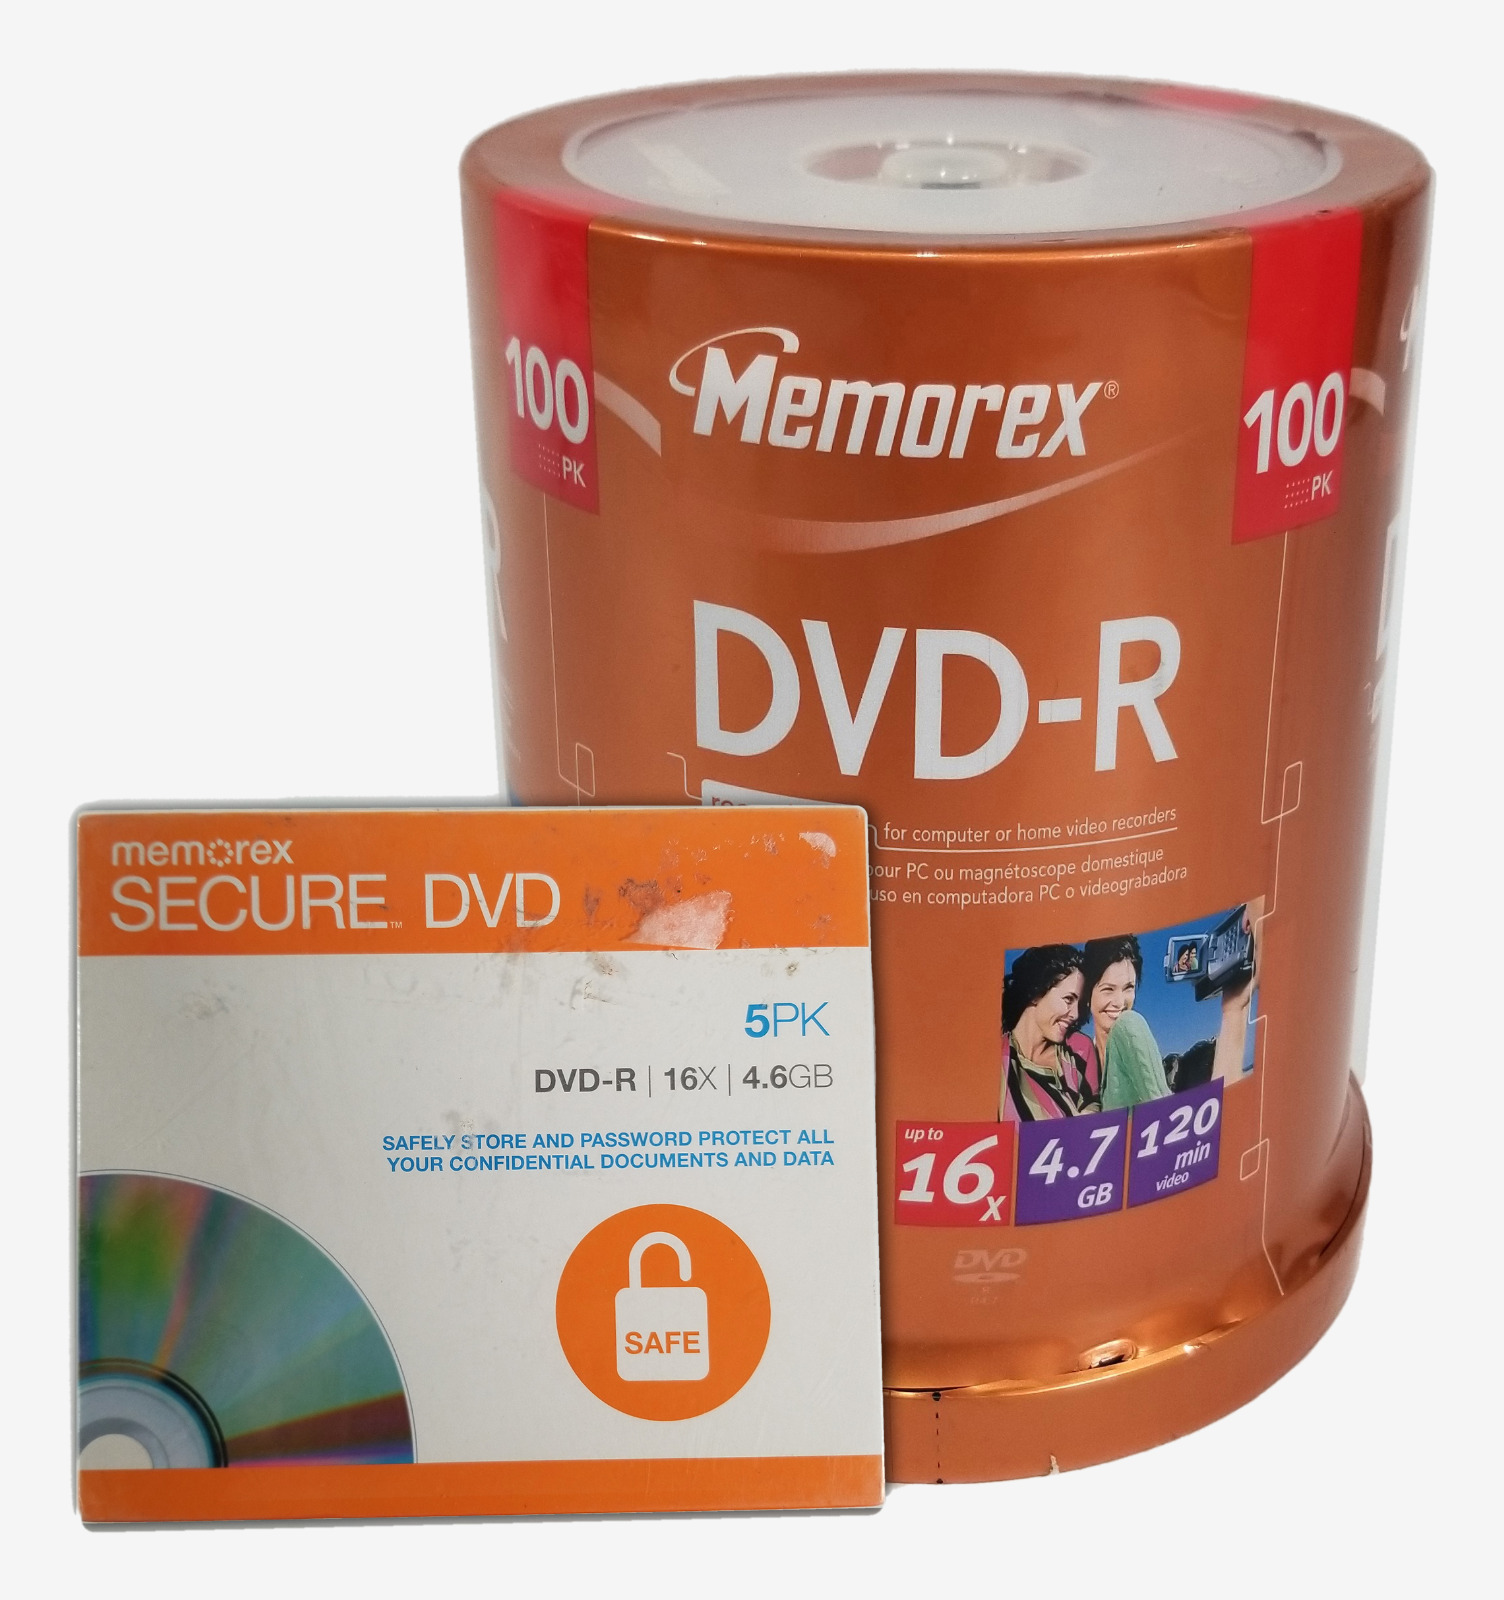 LOT of Memorex 100 pack DVD-R 16x, 4.7GB and 5 pack Secure DVD DVD-R 16x, 4.6GB